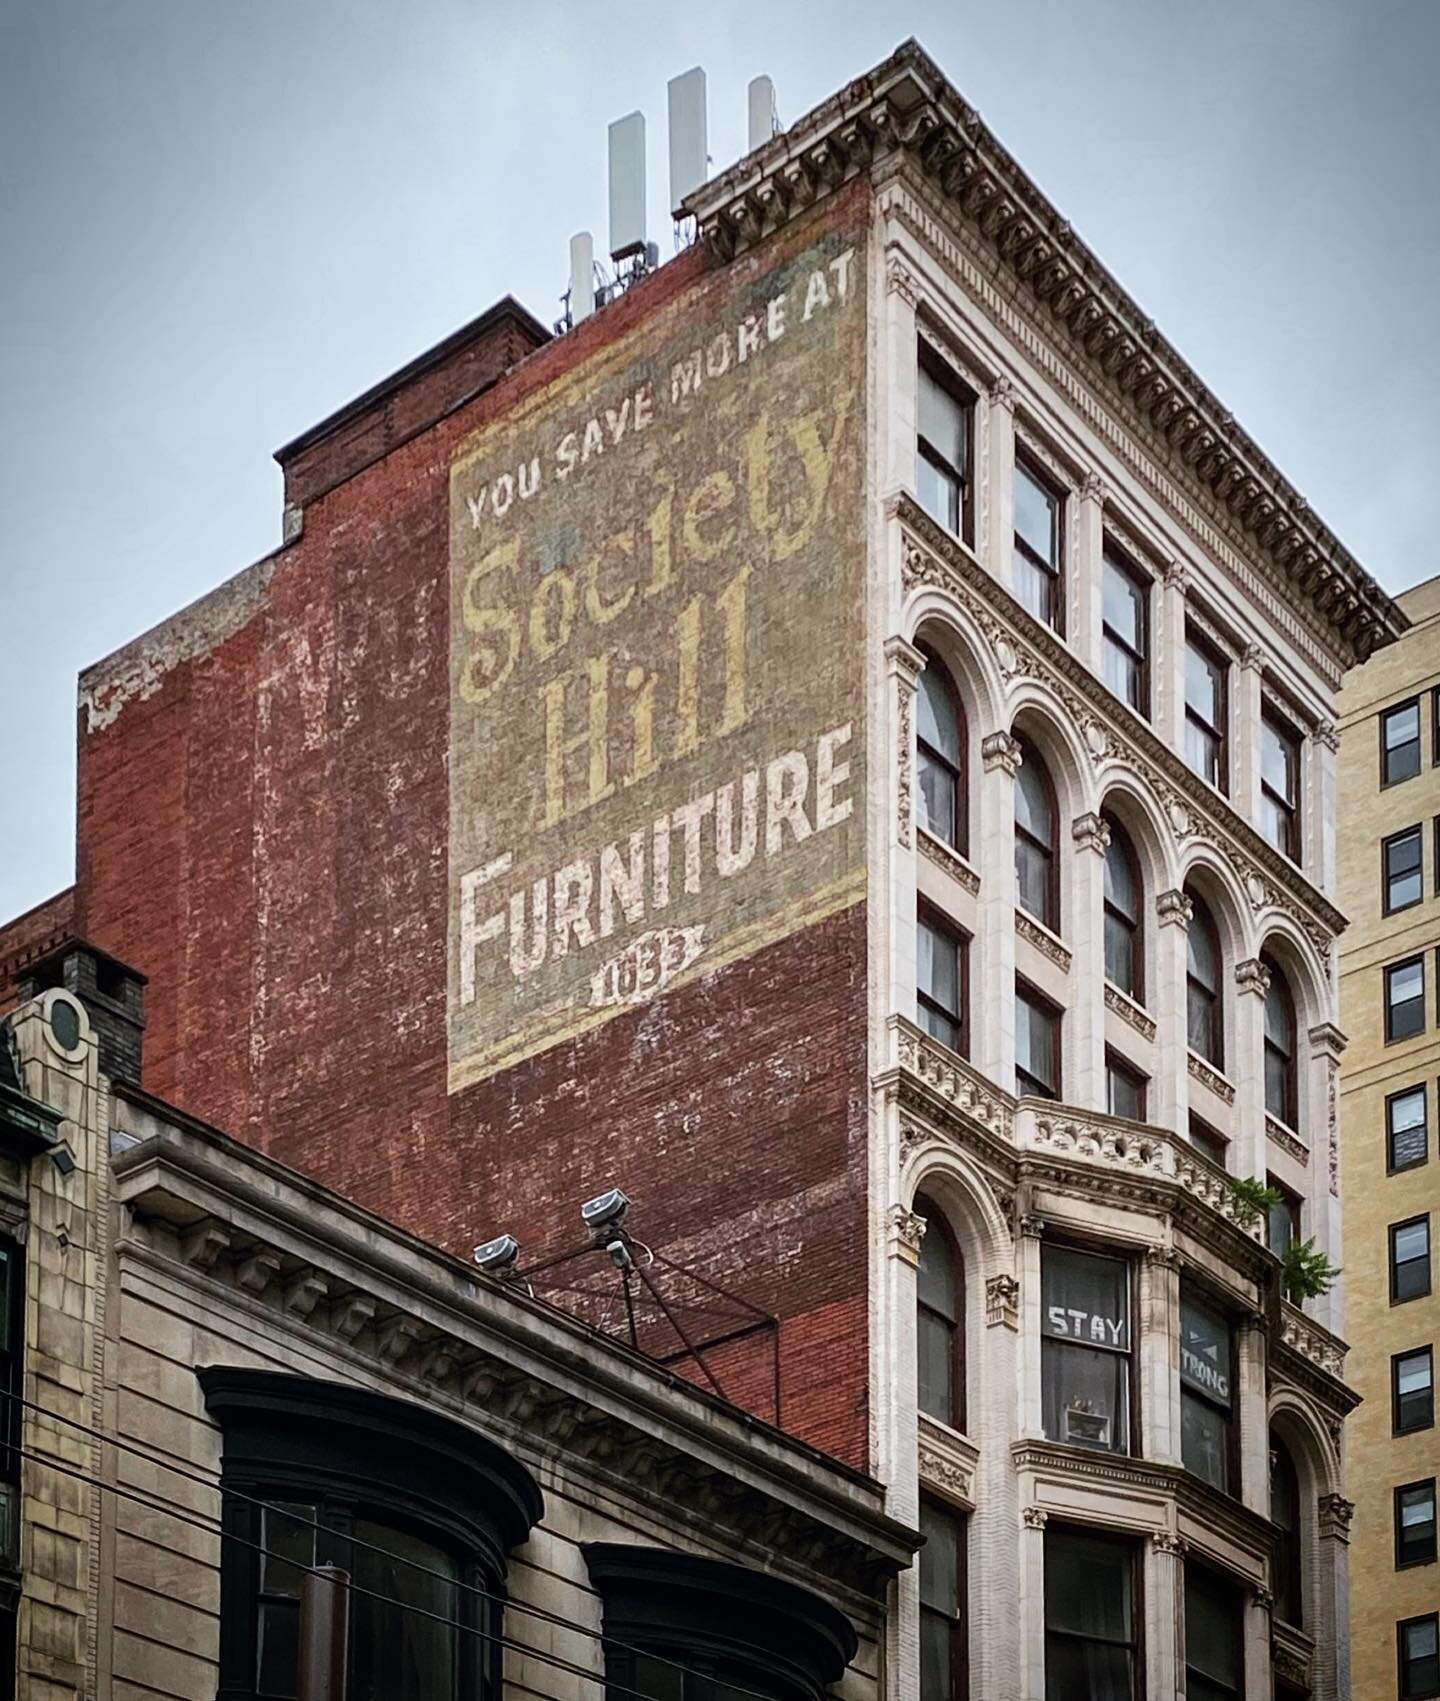 One of the most popular ghost signs of Philadelphia is this Society Hill Furniture ad in Center City. And there&rsquo;s a barely legible ad underneath too! #phillytype